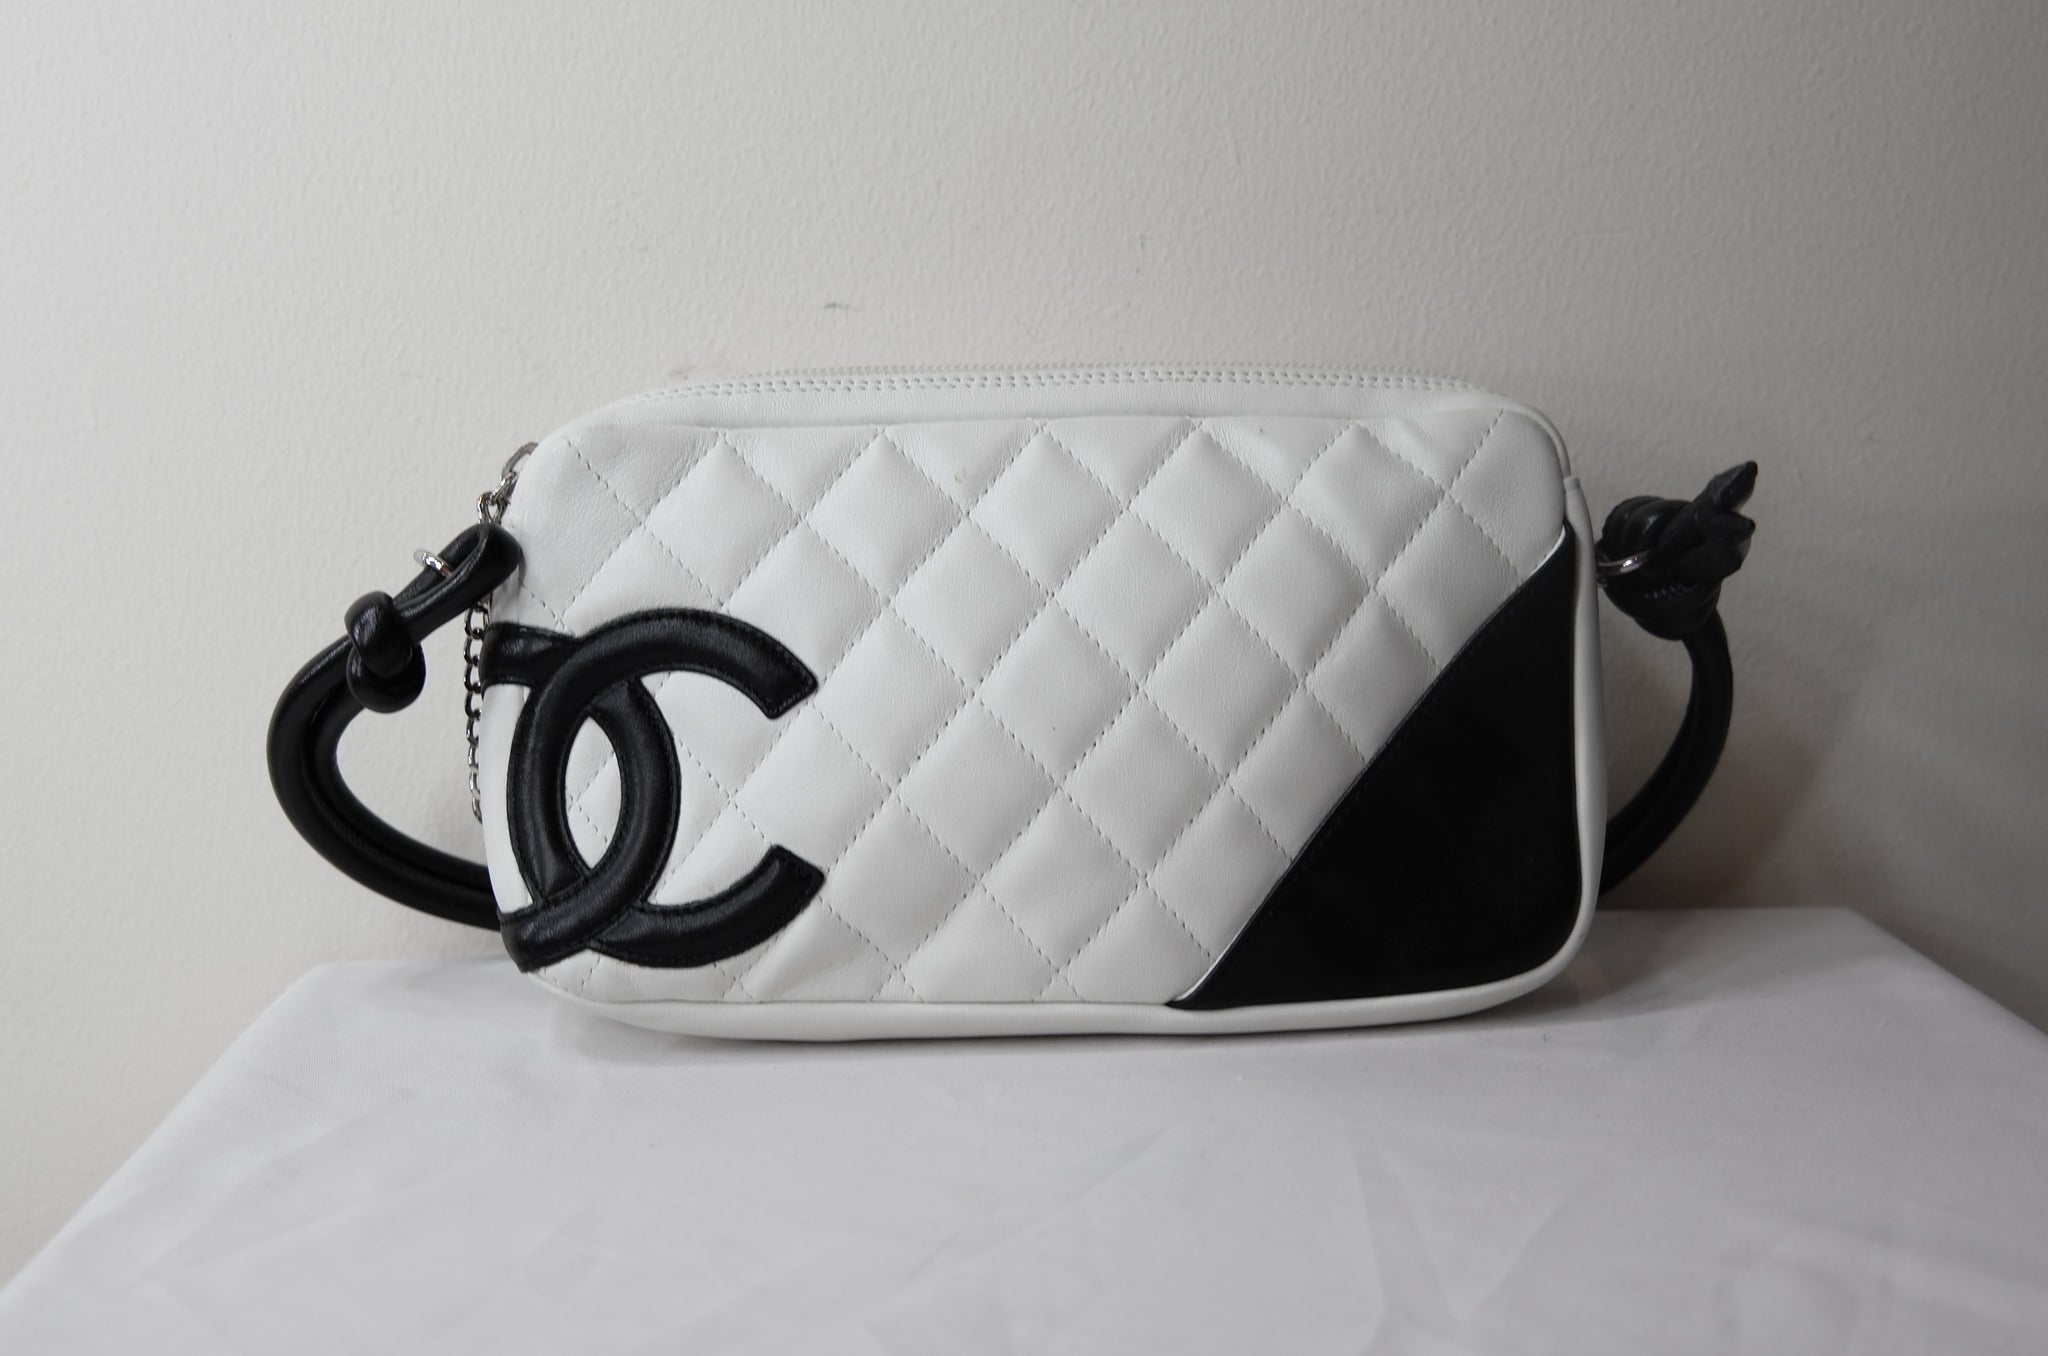 CC Leather Quilted Cambon Shoulder Bag (Authentic Pre-Owned)